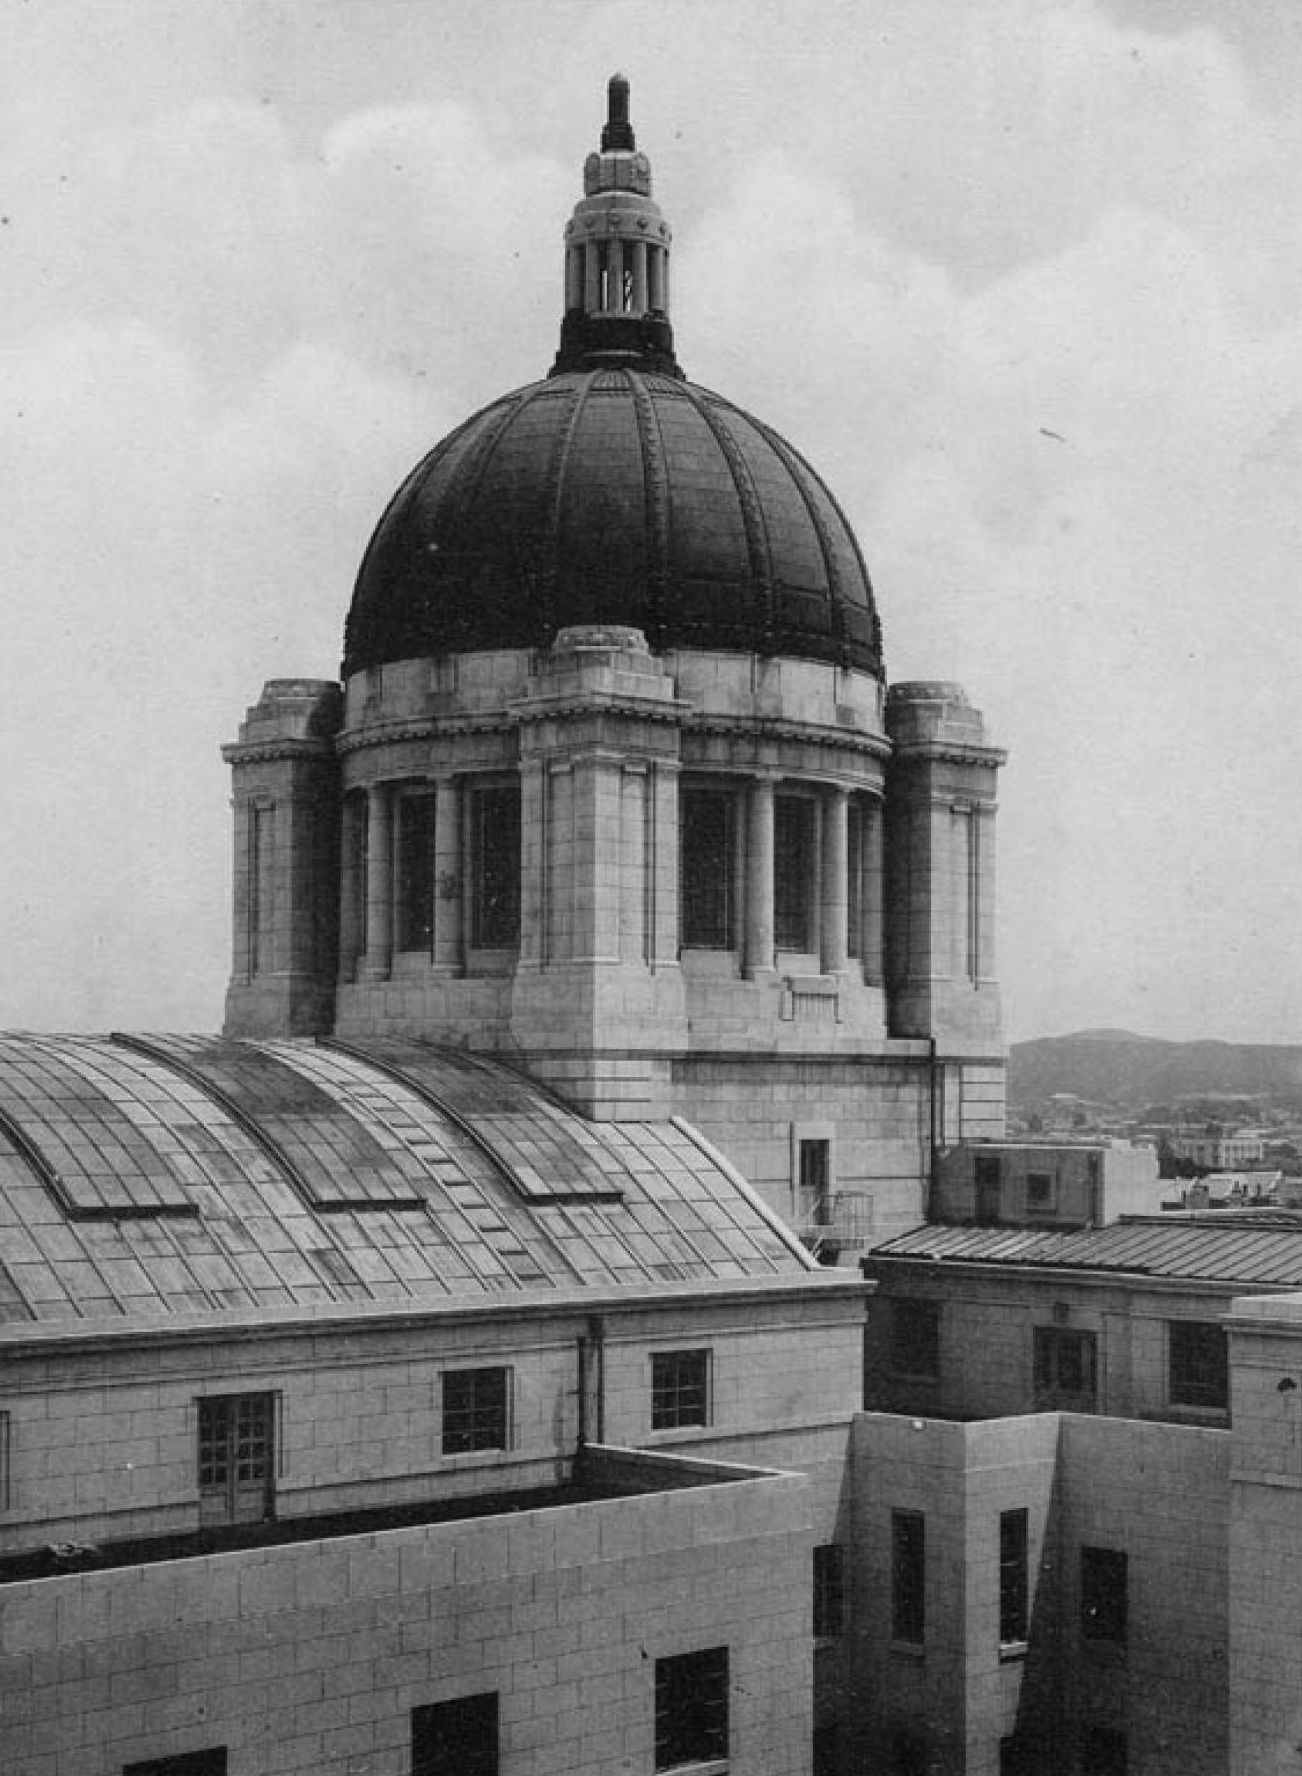 Dome of the General Government Building, Keijo (now Seoul), Korea, 1926